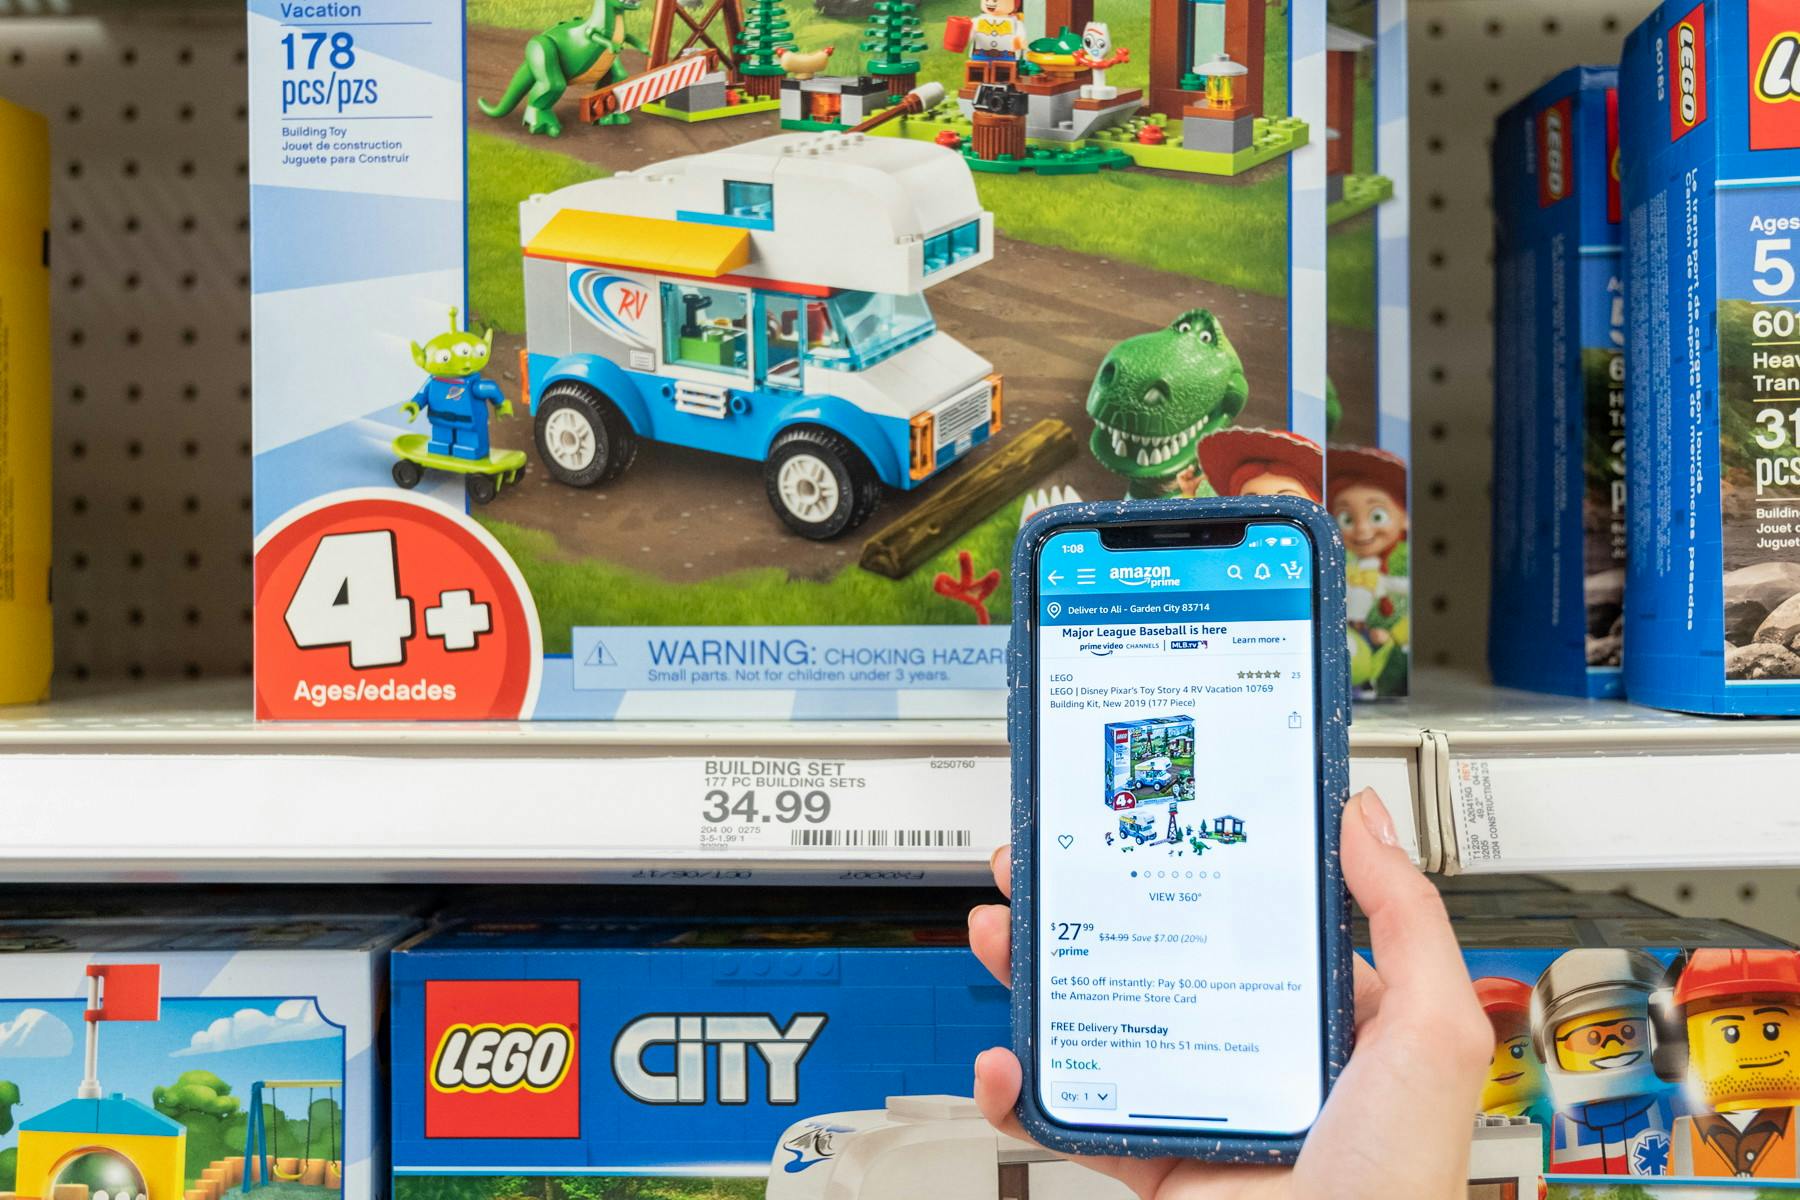 A person's hand holding up their phone displaying a product on the Amazon app in front of the physical product sitting on a Target shelf.